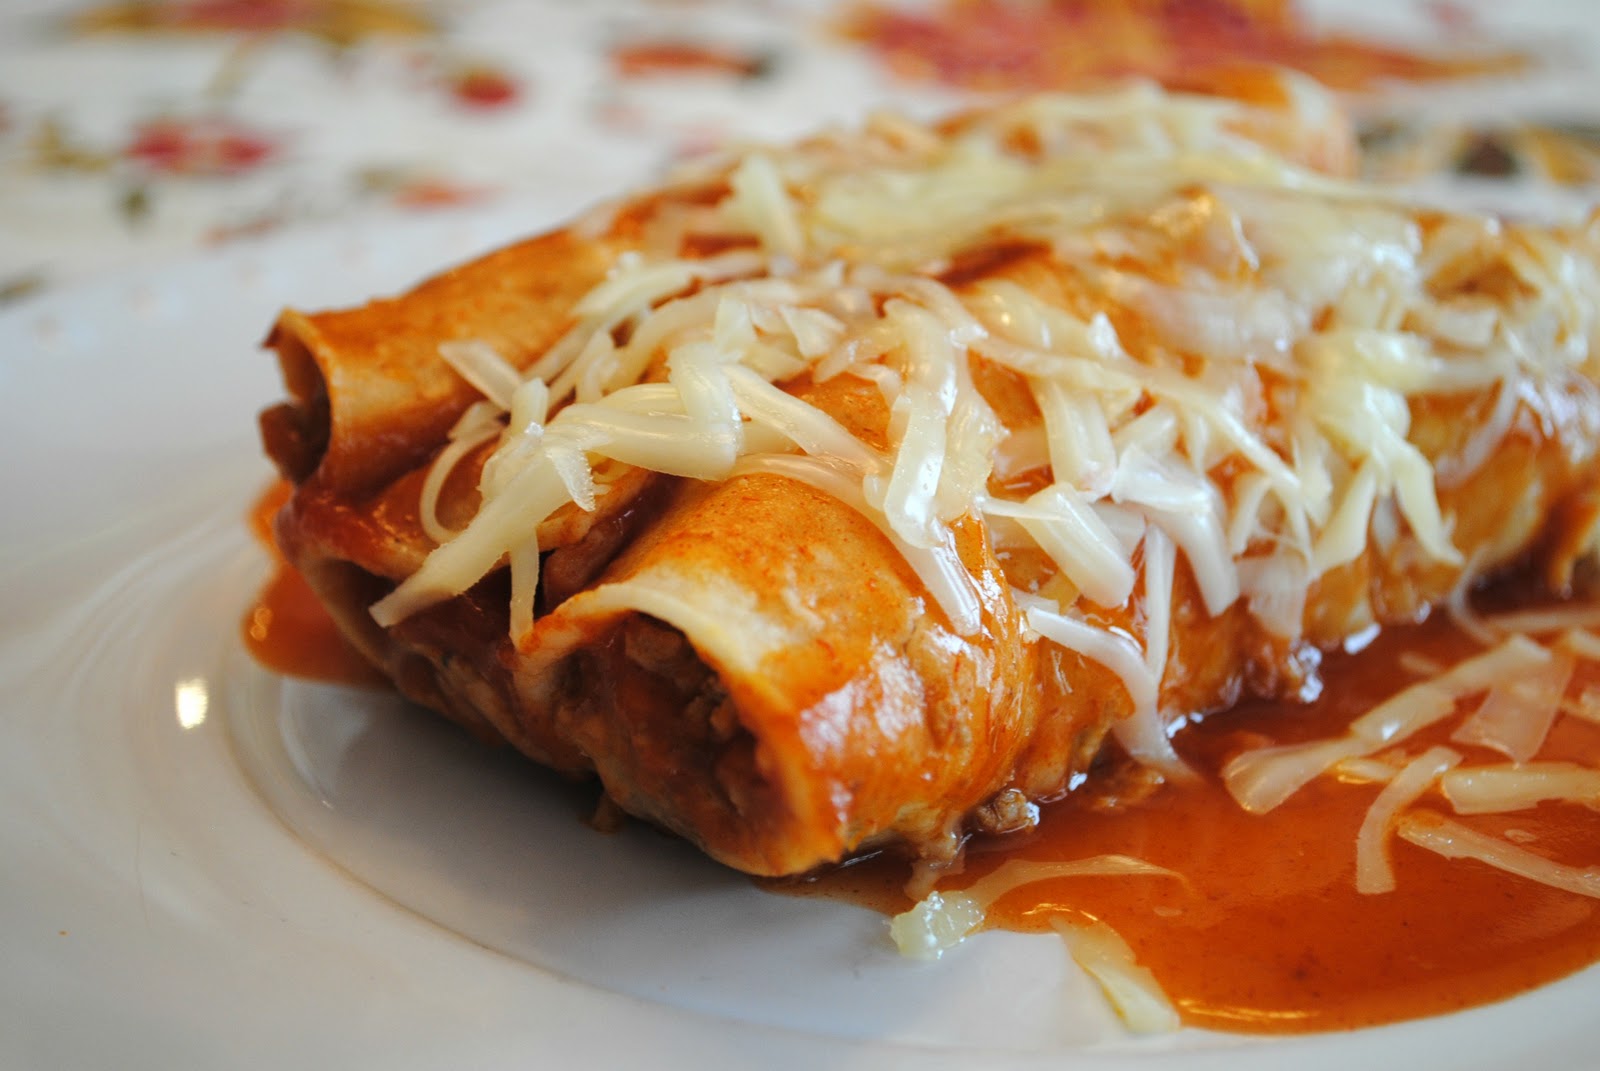 Living With Imperfection: Quick Turkey Enchiladas